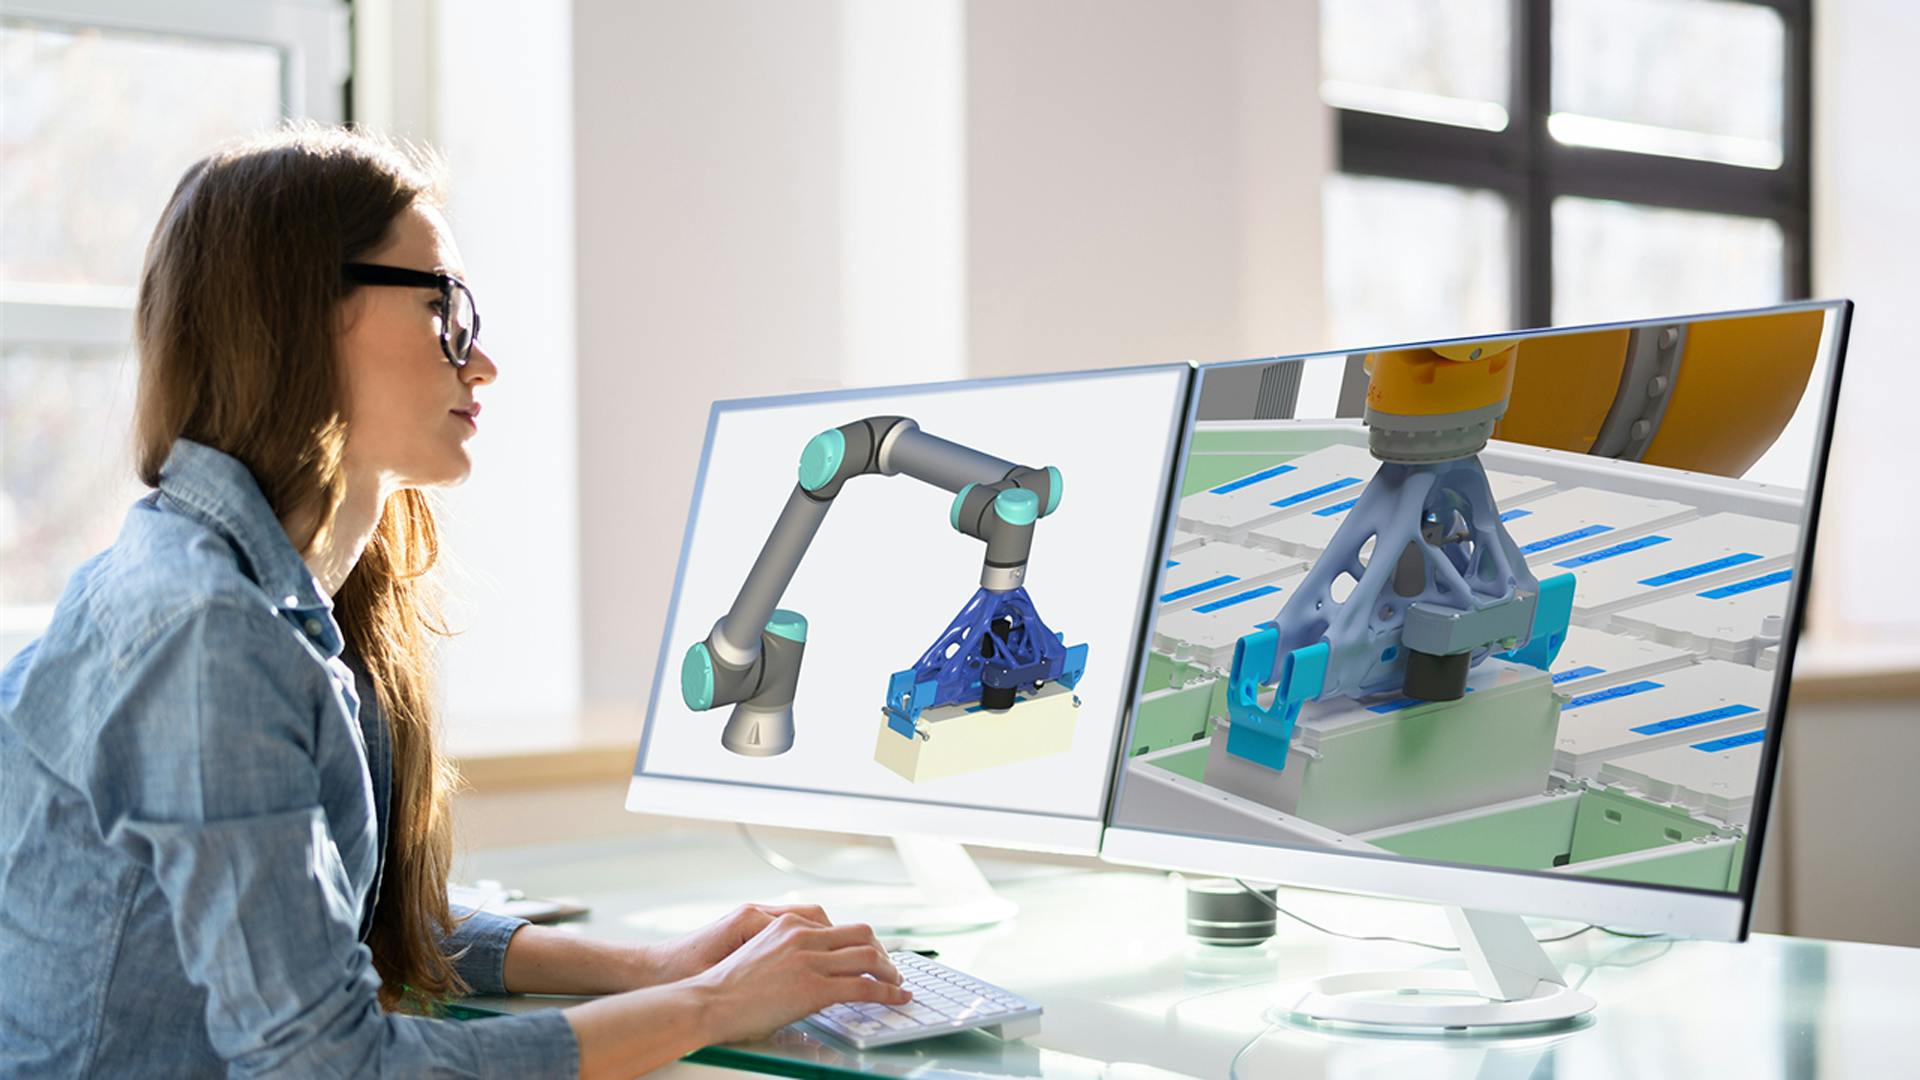 An engineer looks at robot gripper images on dual computer monitors